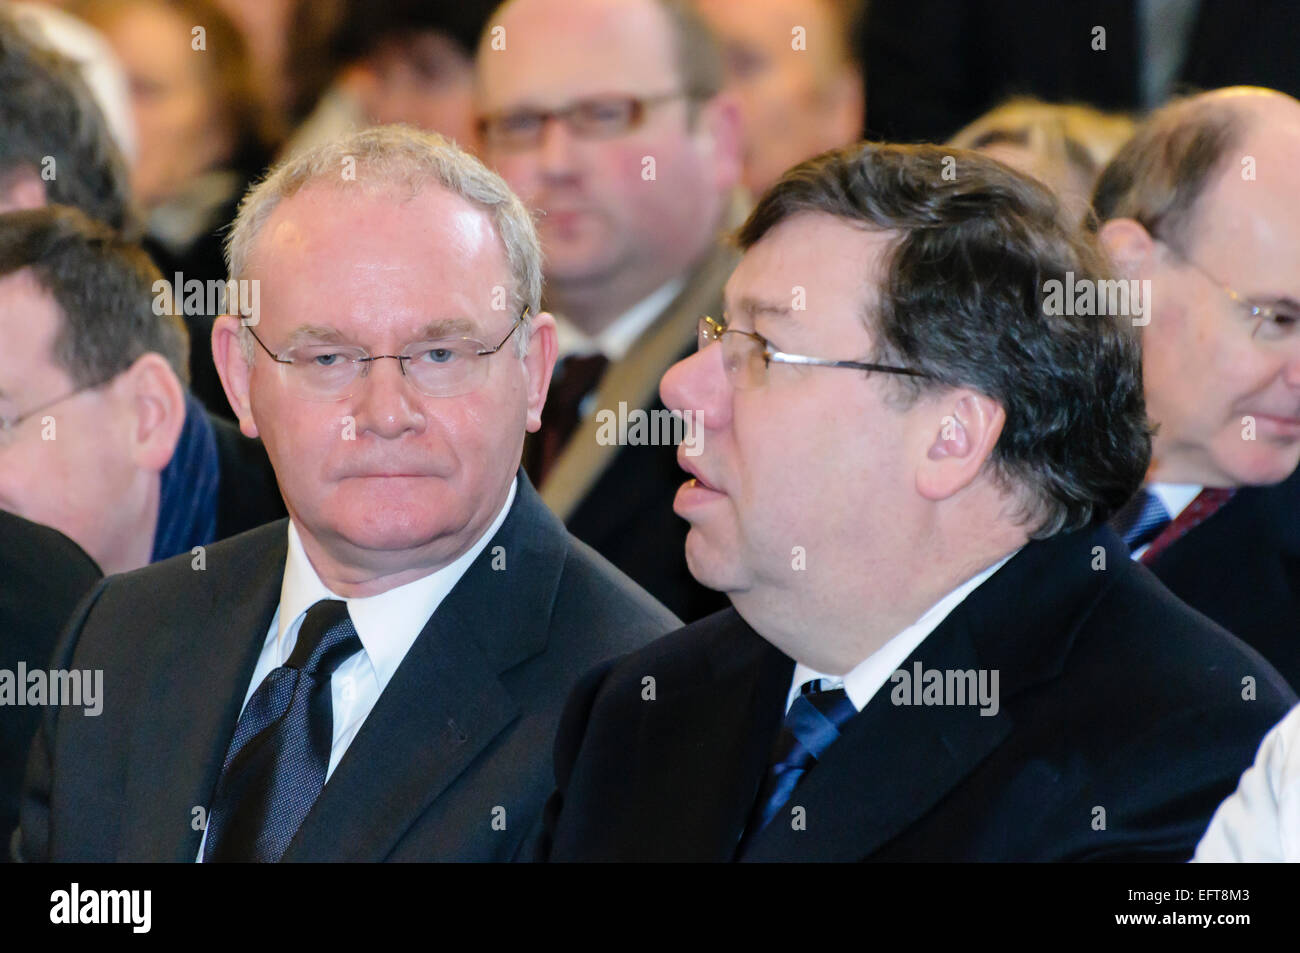 Armagh, Northern Ireland. 05 Jan 2010 - Martin McGuinness and former Taoiseach Brian Cowan at the requiem mass for Cardinal Cahal Daly Stock Photo